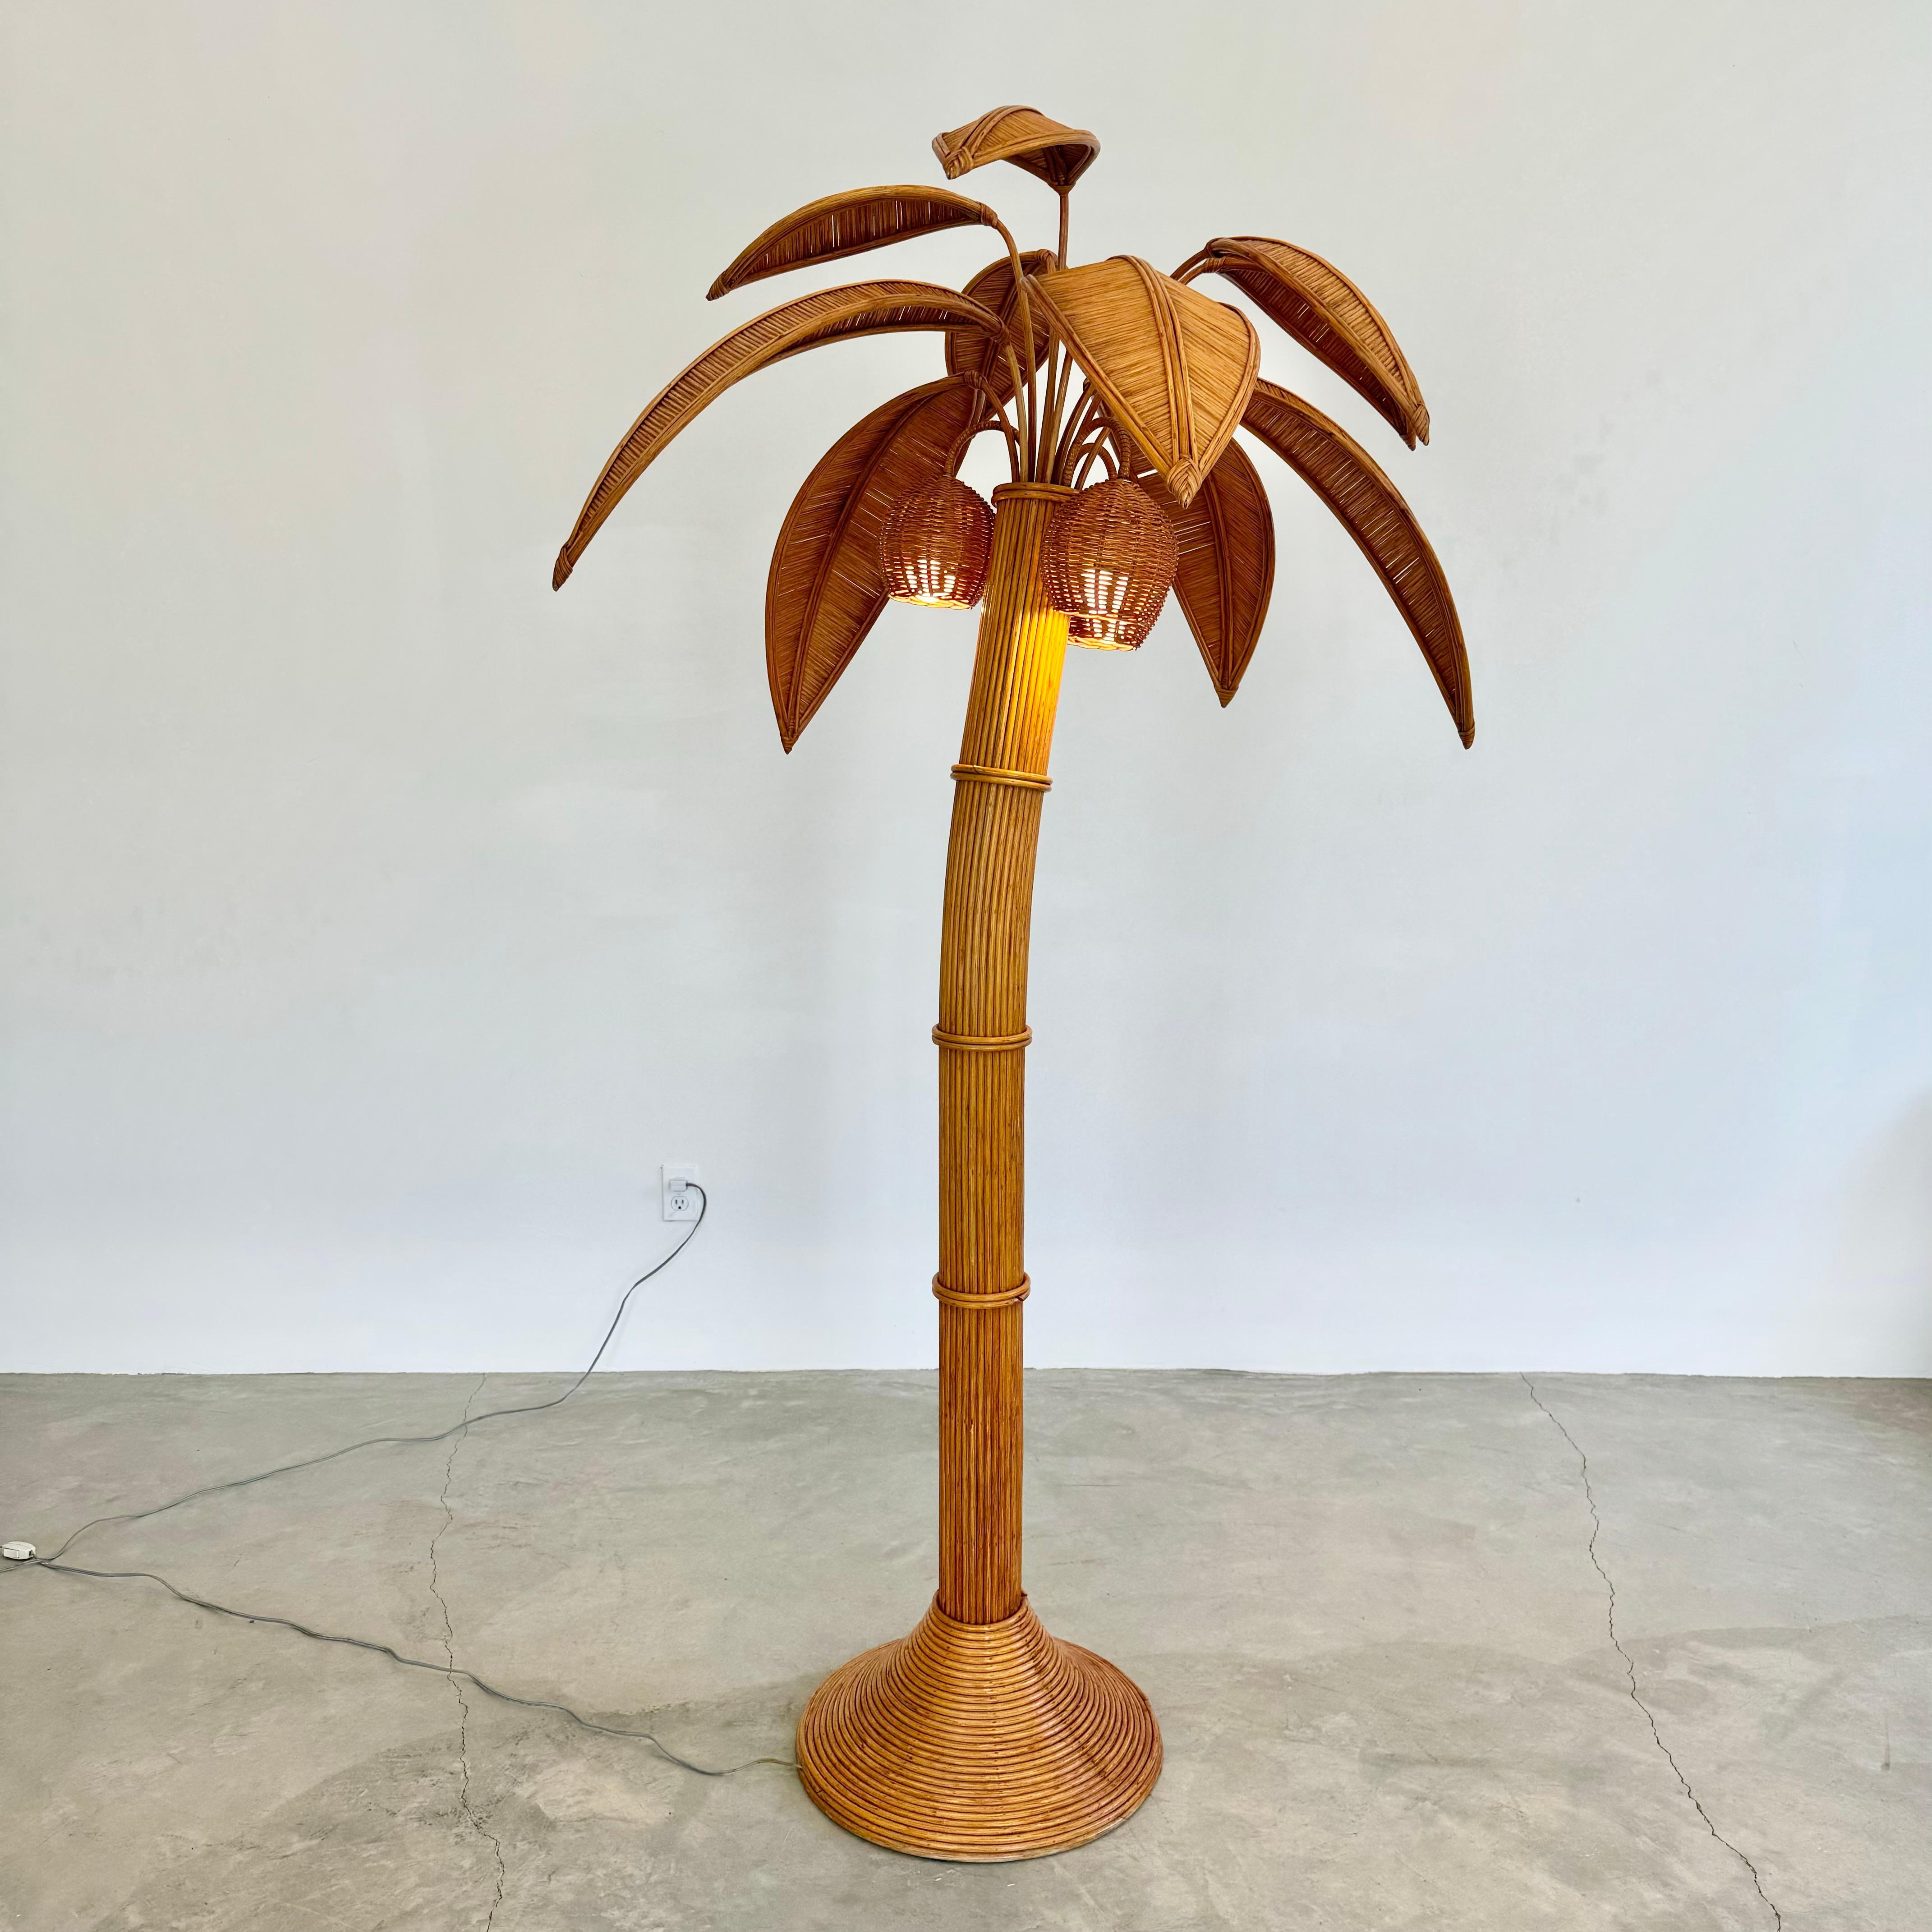 Late 20th Century Rattan and Wicker Palm Tree Floor Lamp, 1970s United States For Sale